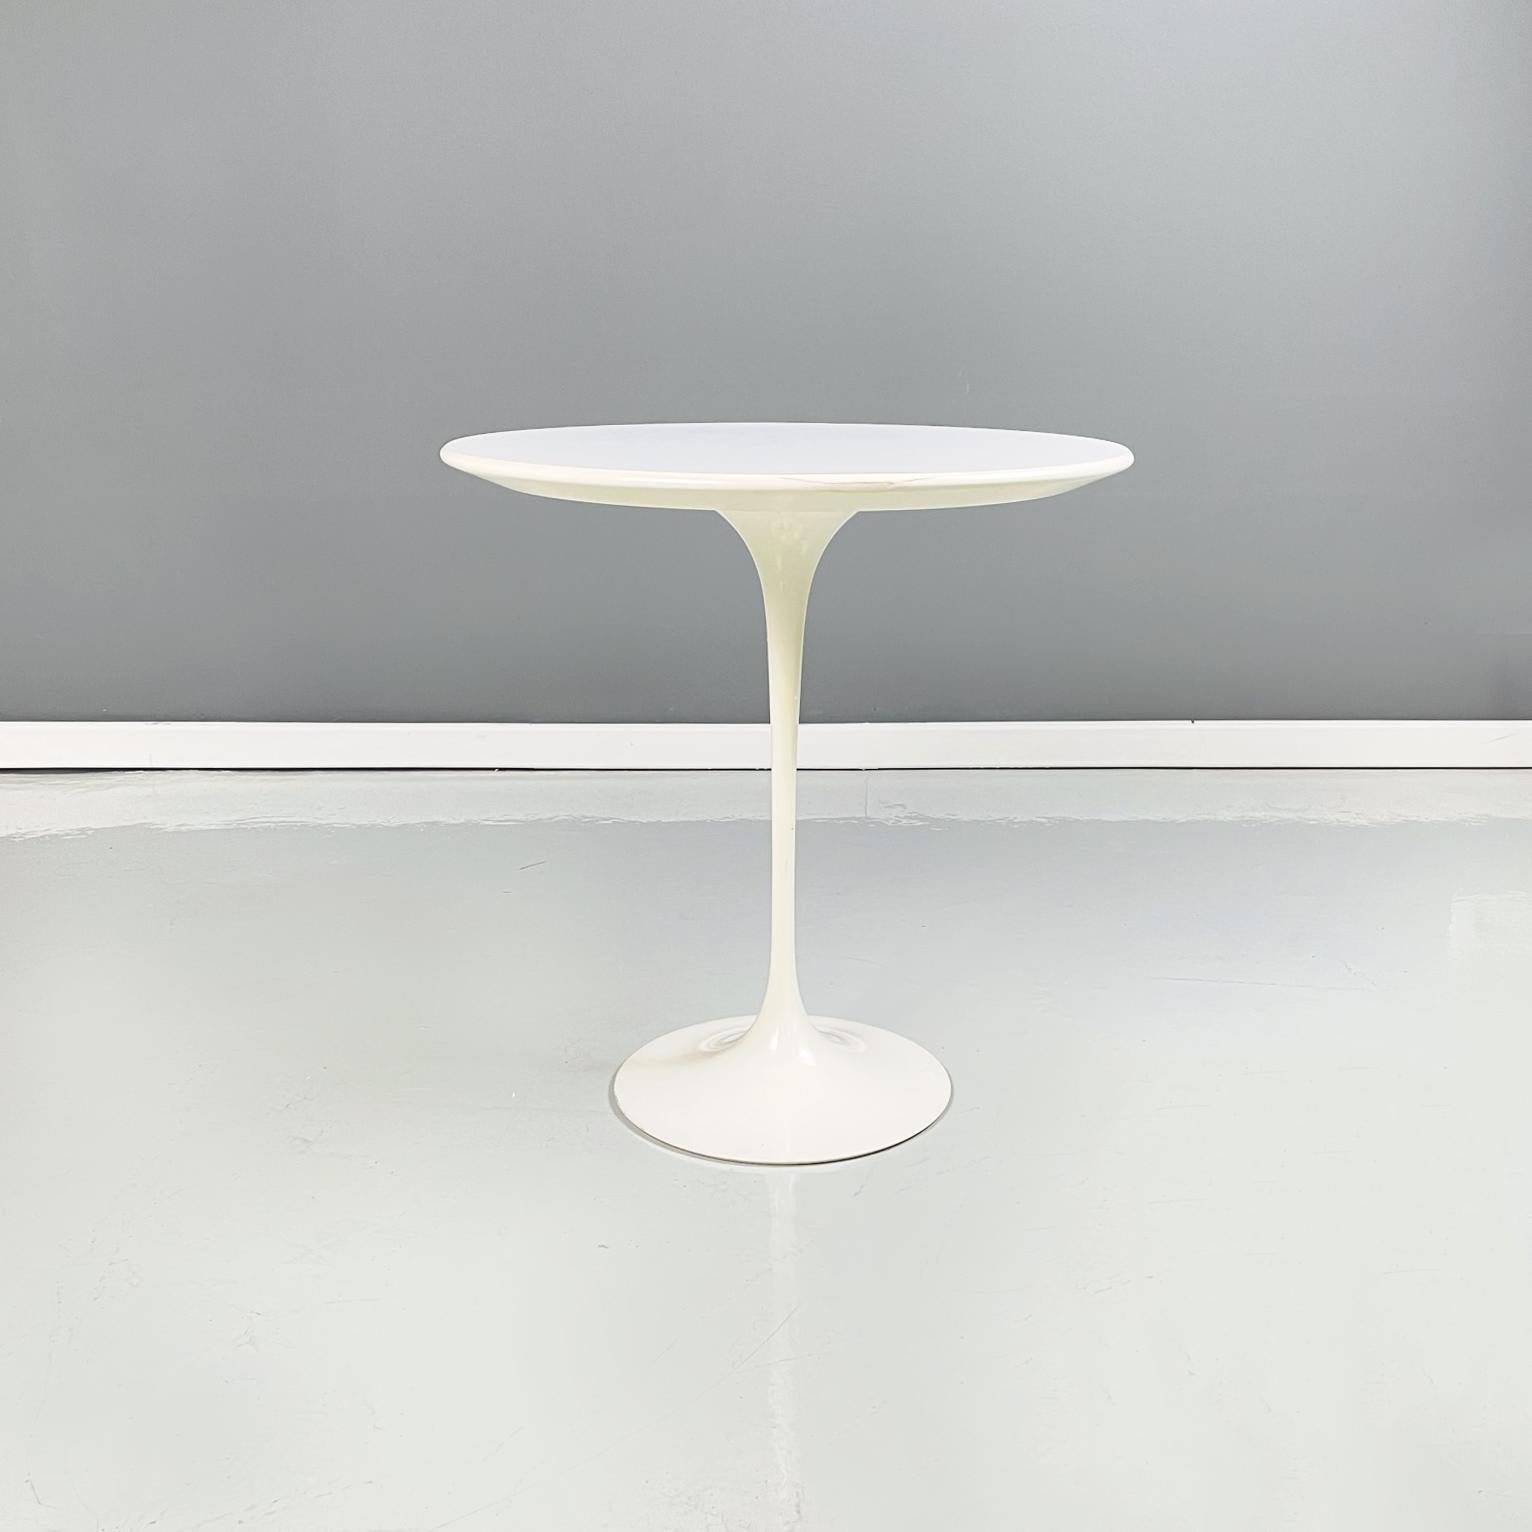 American Mid-Century Modern white laminate wood and metal Coffee table mod. Tulip by Knoll, 1960s
Coffee table mod. Tulip with white laminate round top. Base in white painted metal. 
Produced by Knoll 1960s and designed by Eero Saarinen in